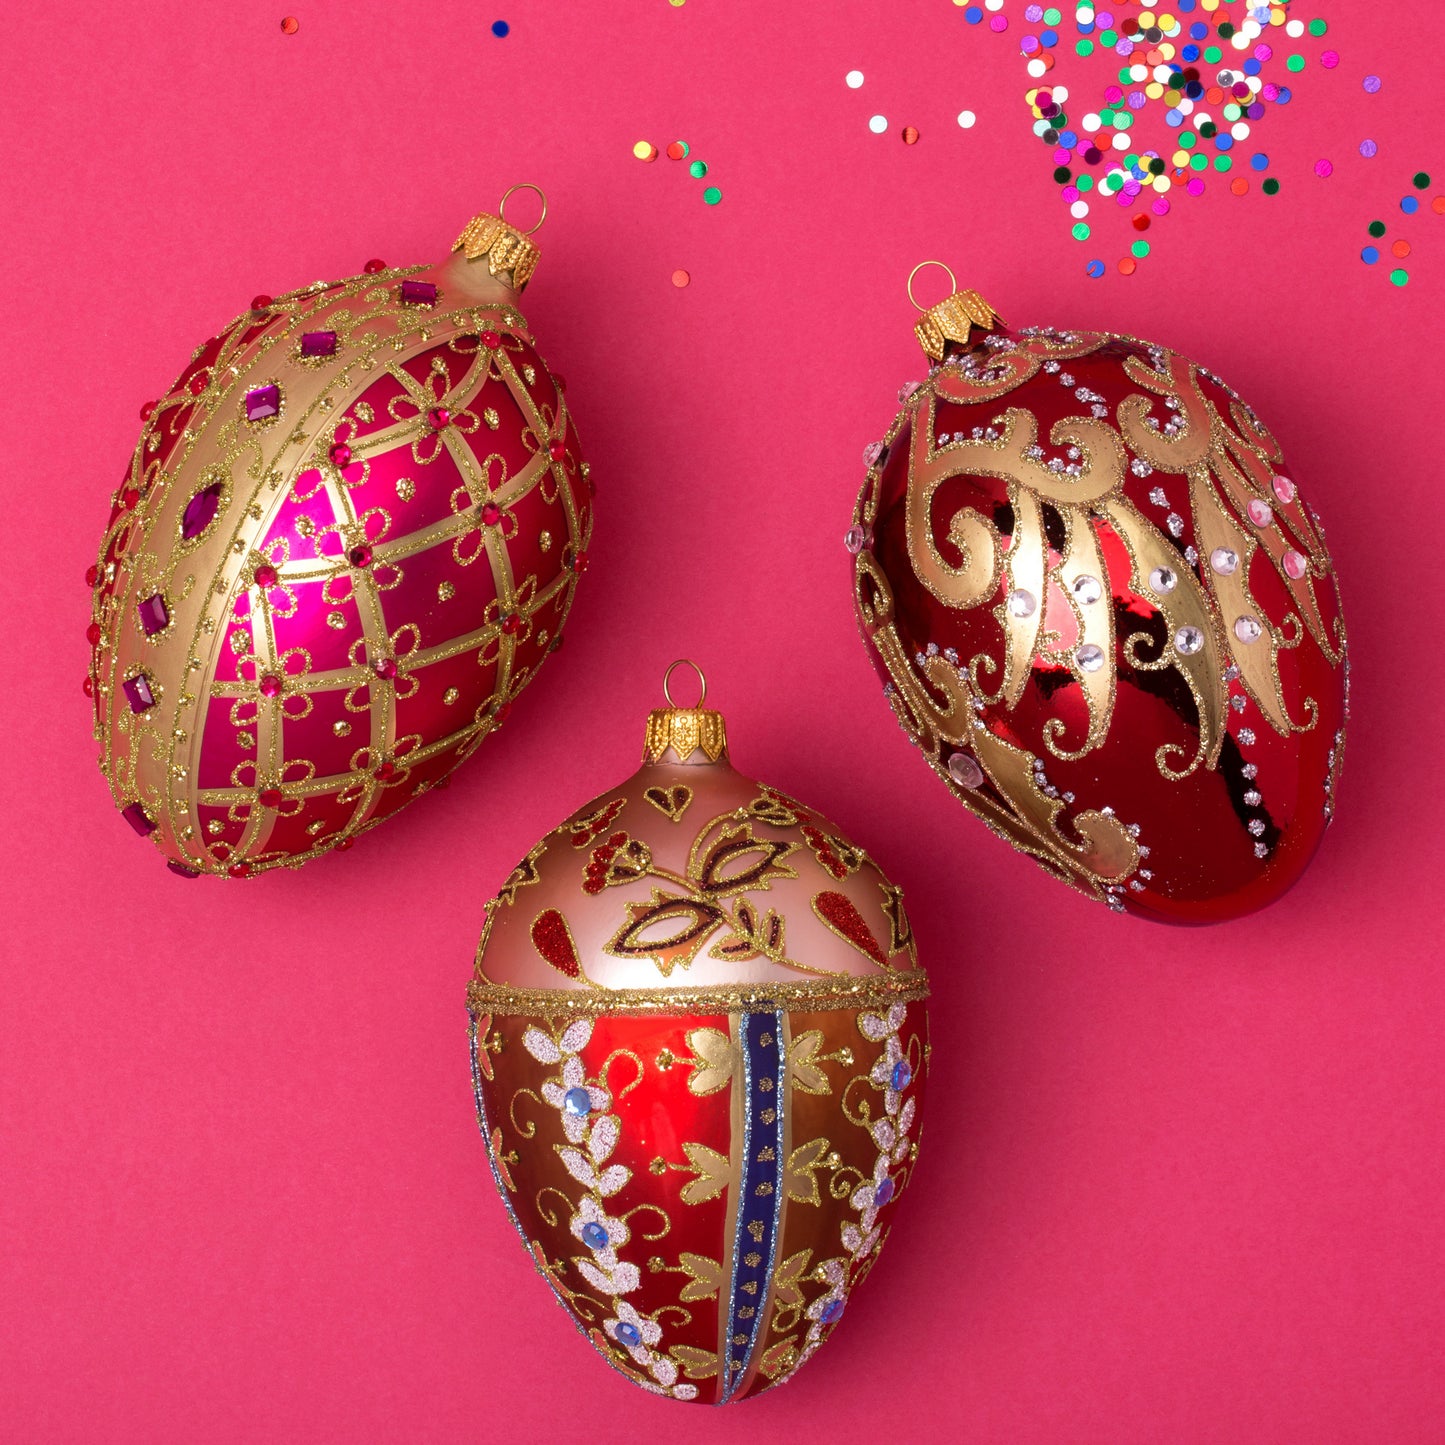 FABERGÉ EGG WITH ROYAL TAPESTRY PATTERN